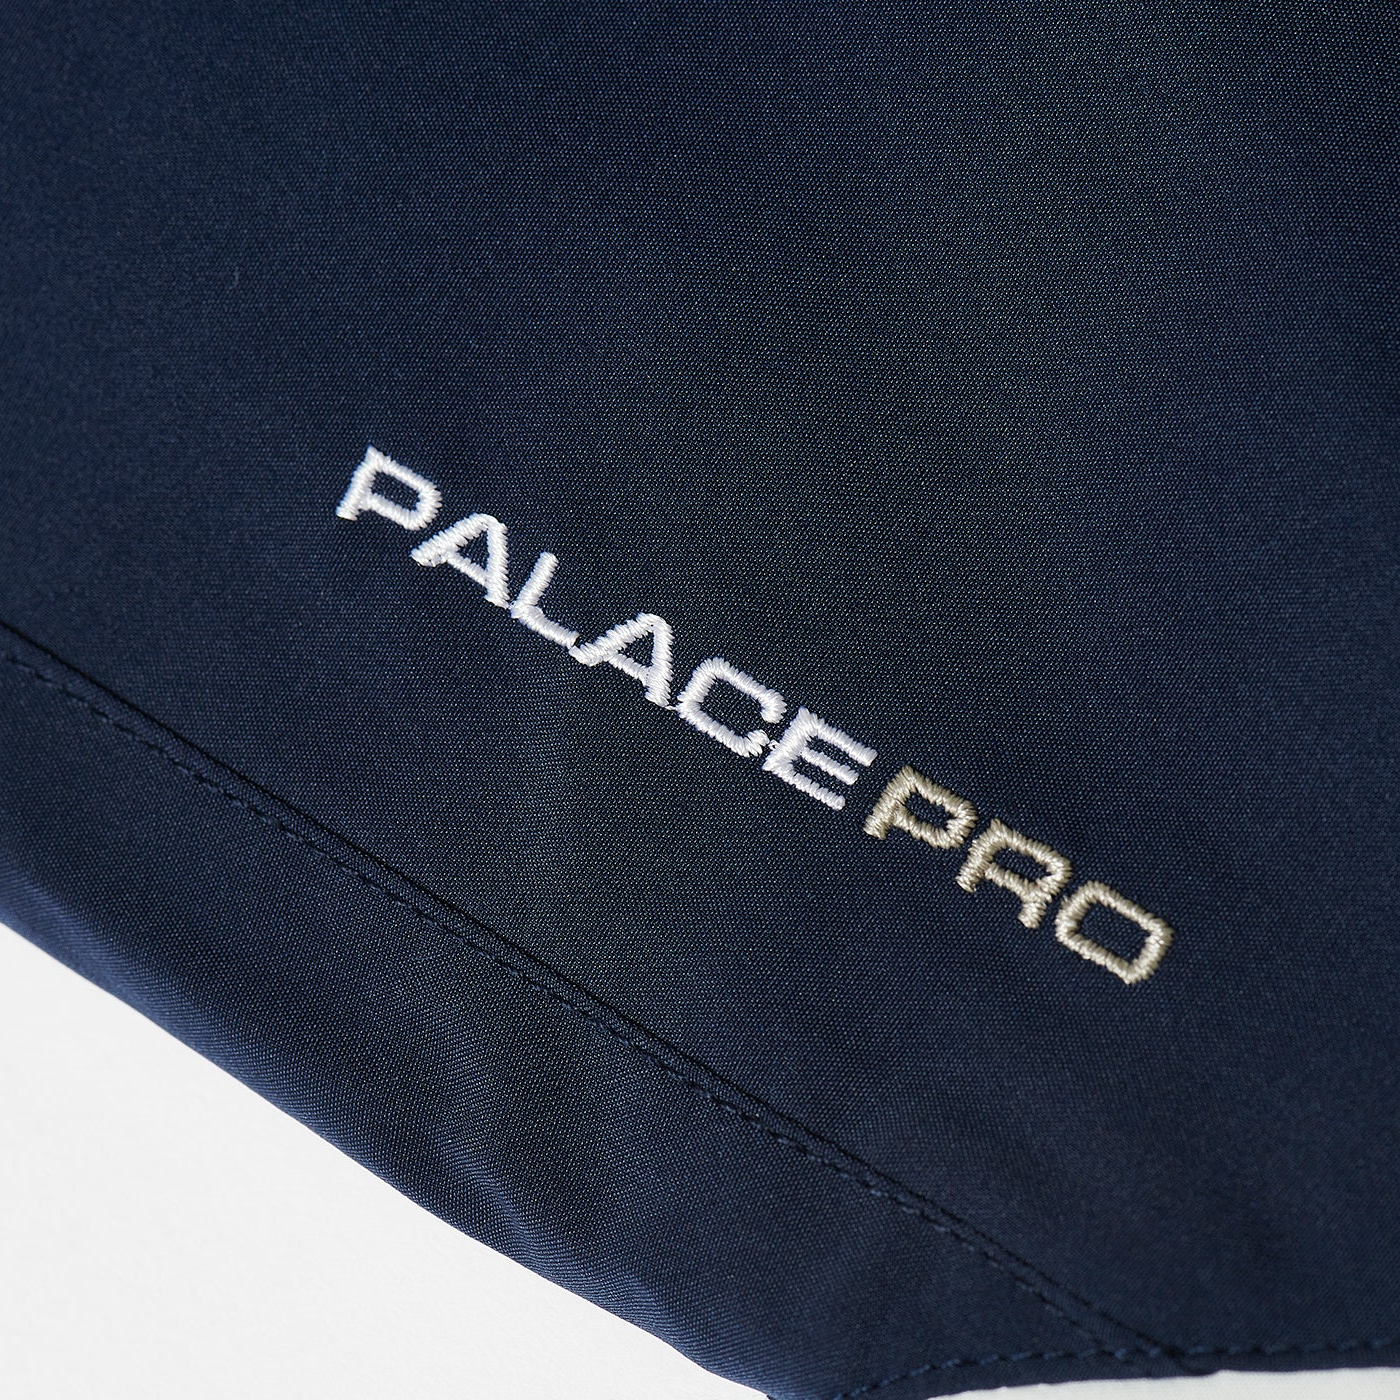 PALACE PRO SHELL JOGGER 23FW•状態新品 - その他